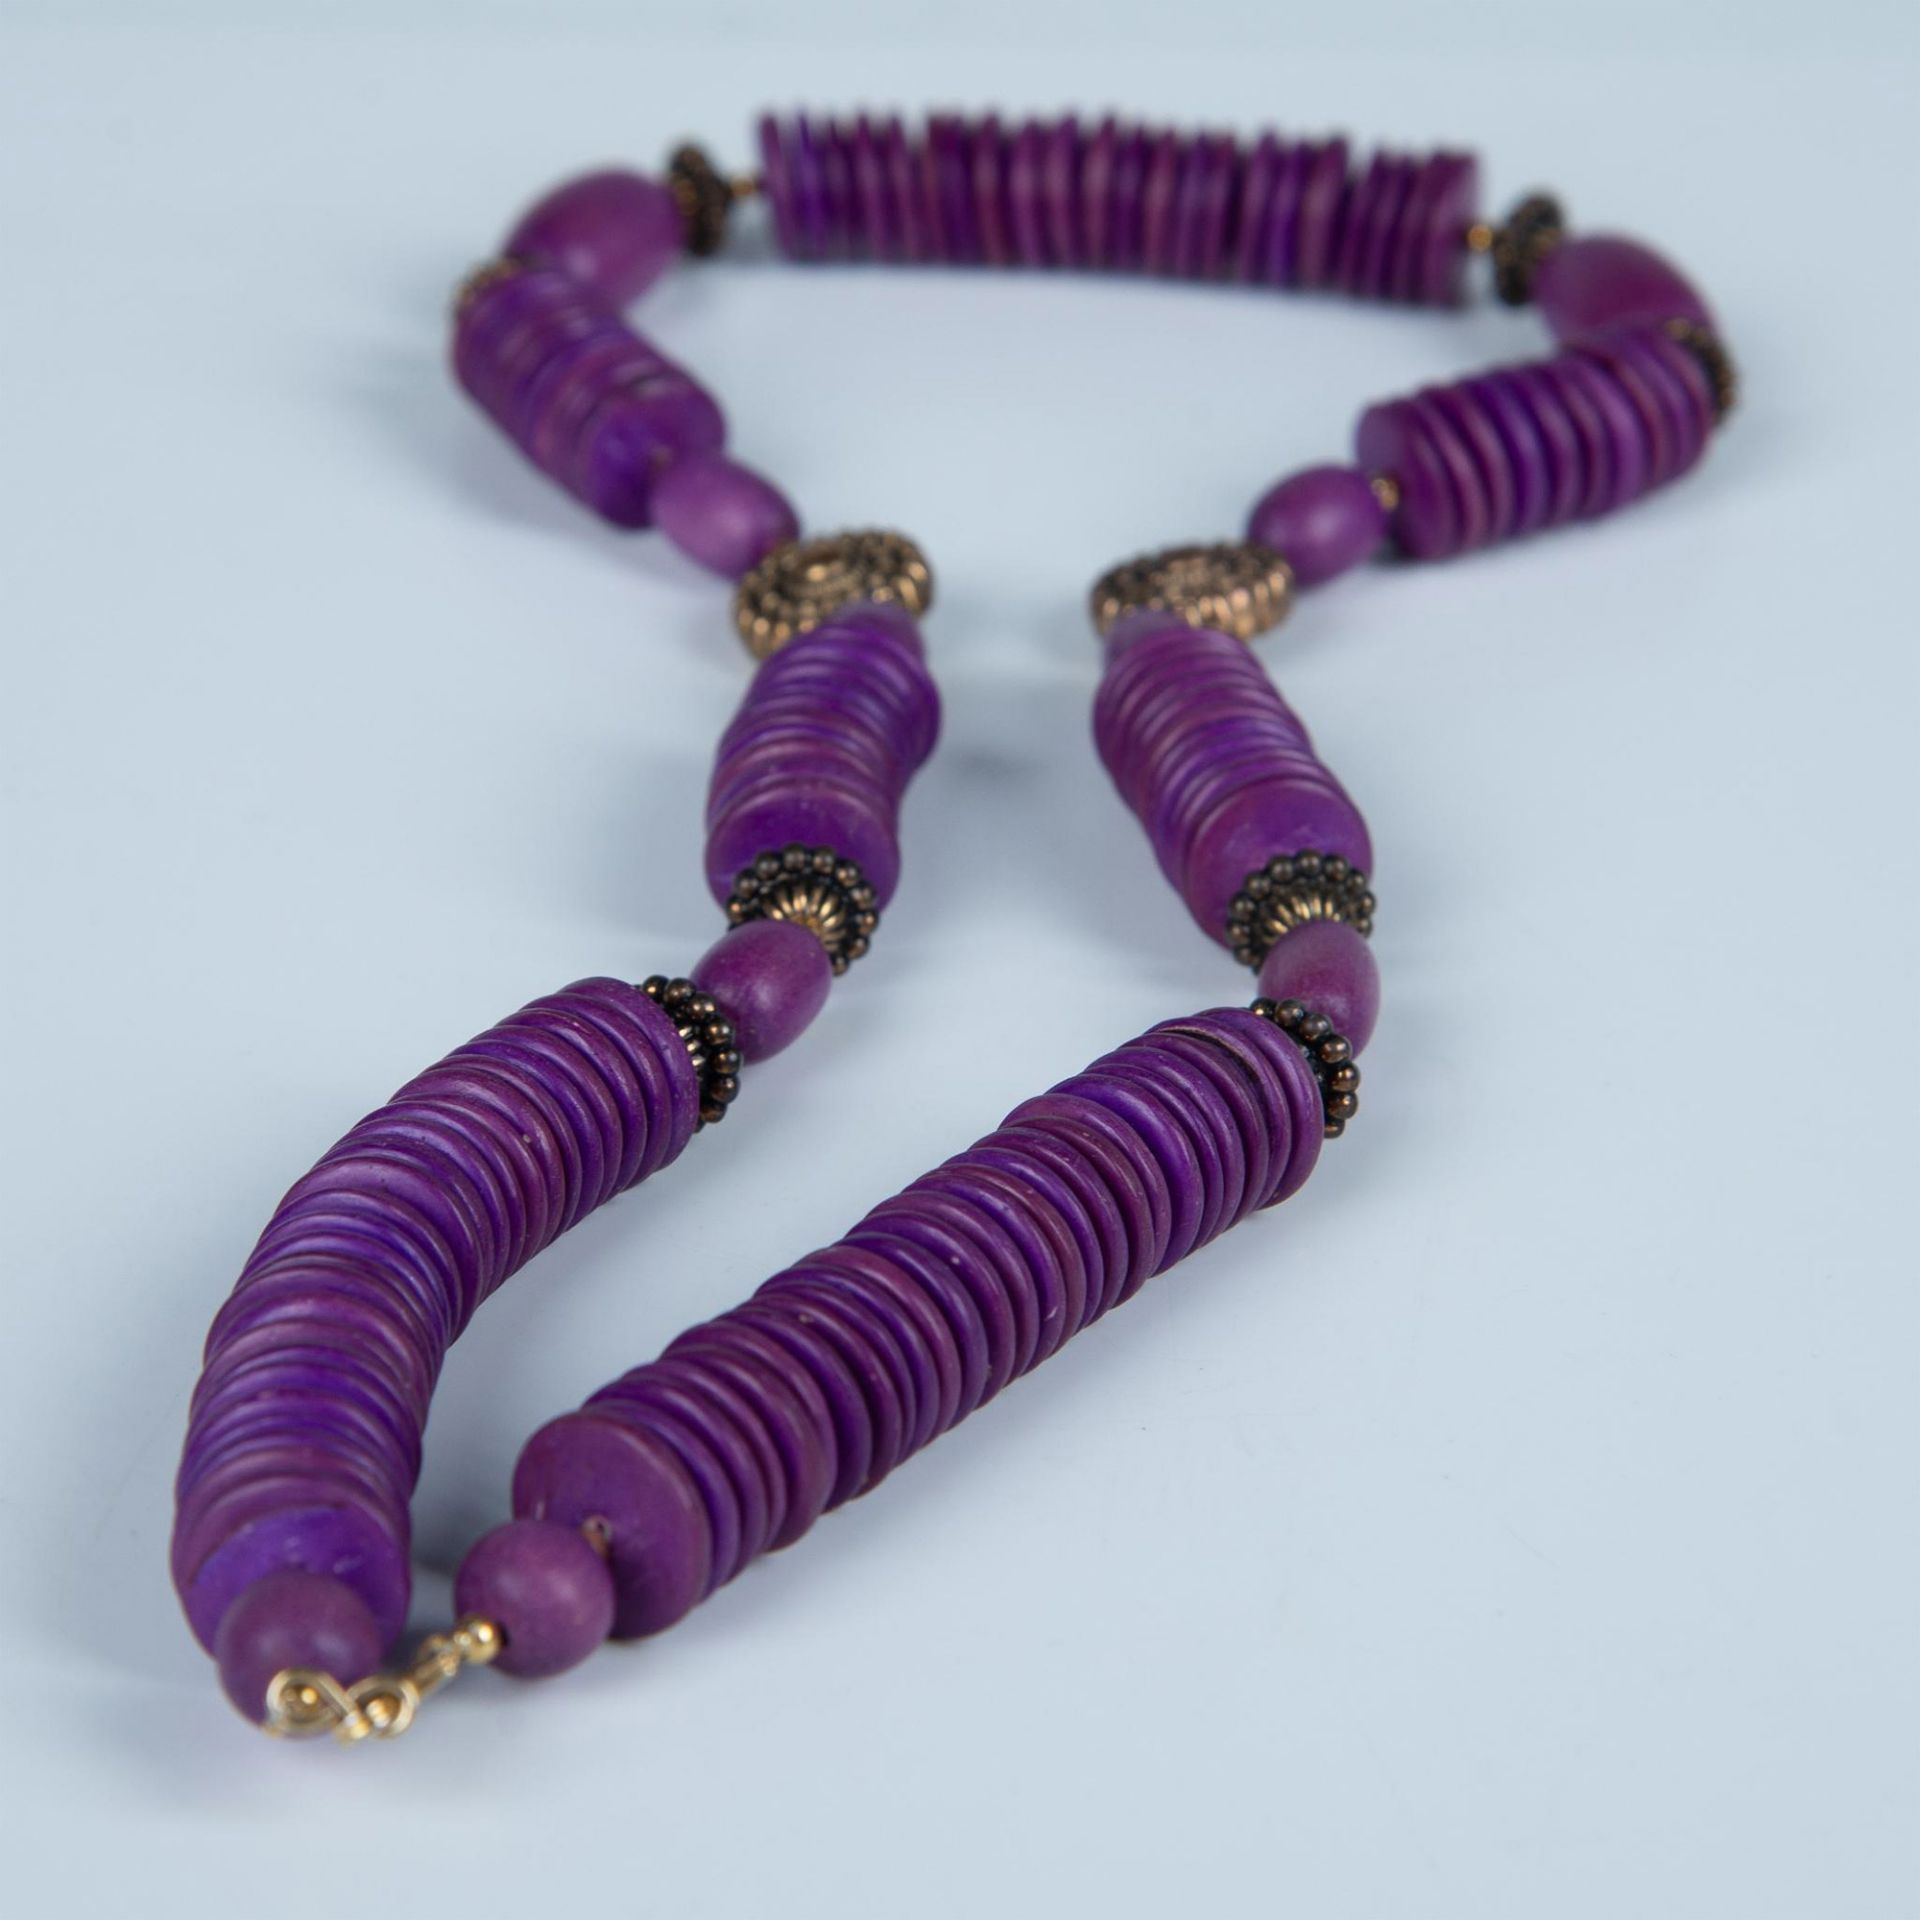 Beautiful Gold and Copper Tone Purple Wood Bead Necklace - Image 3 of 3